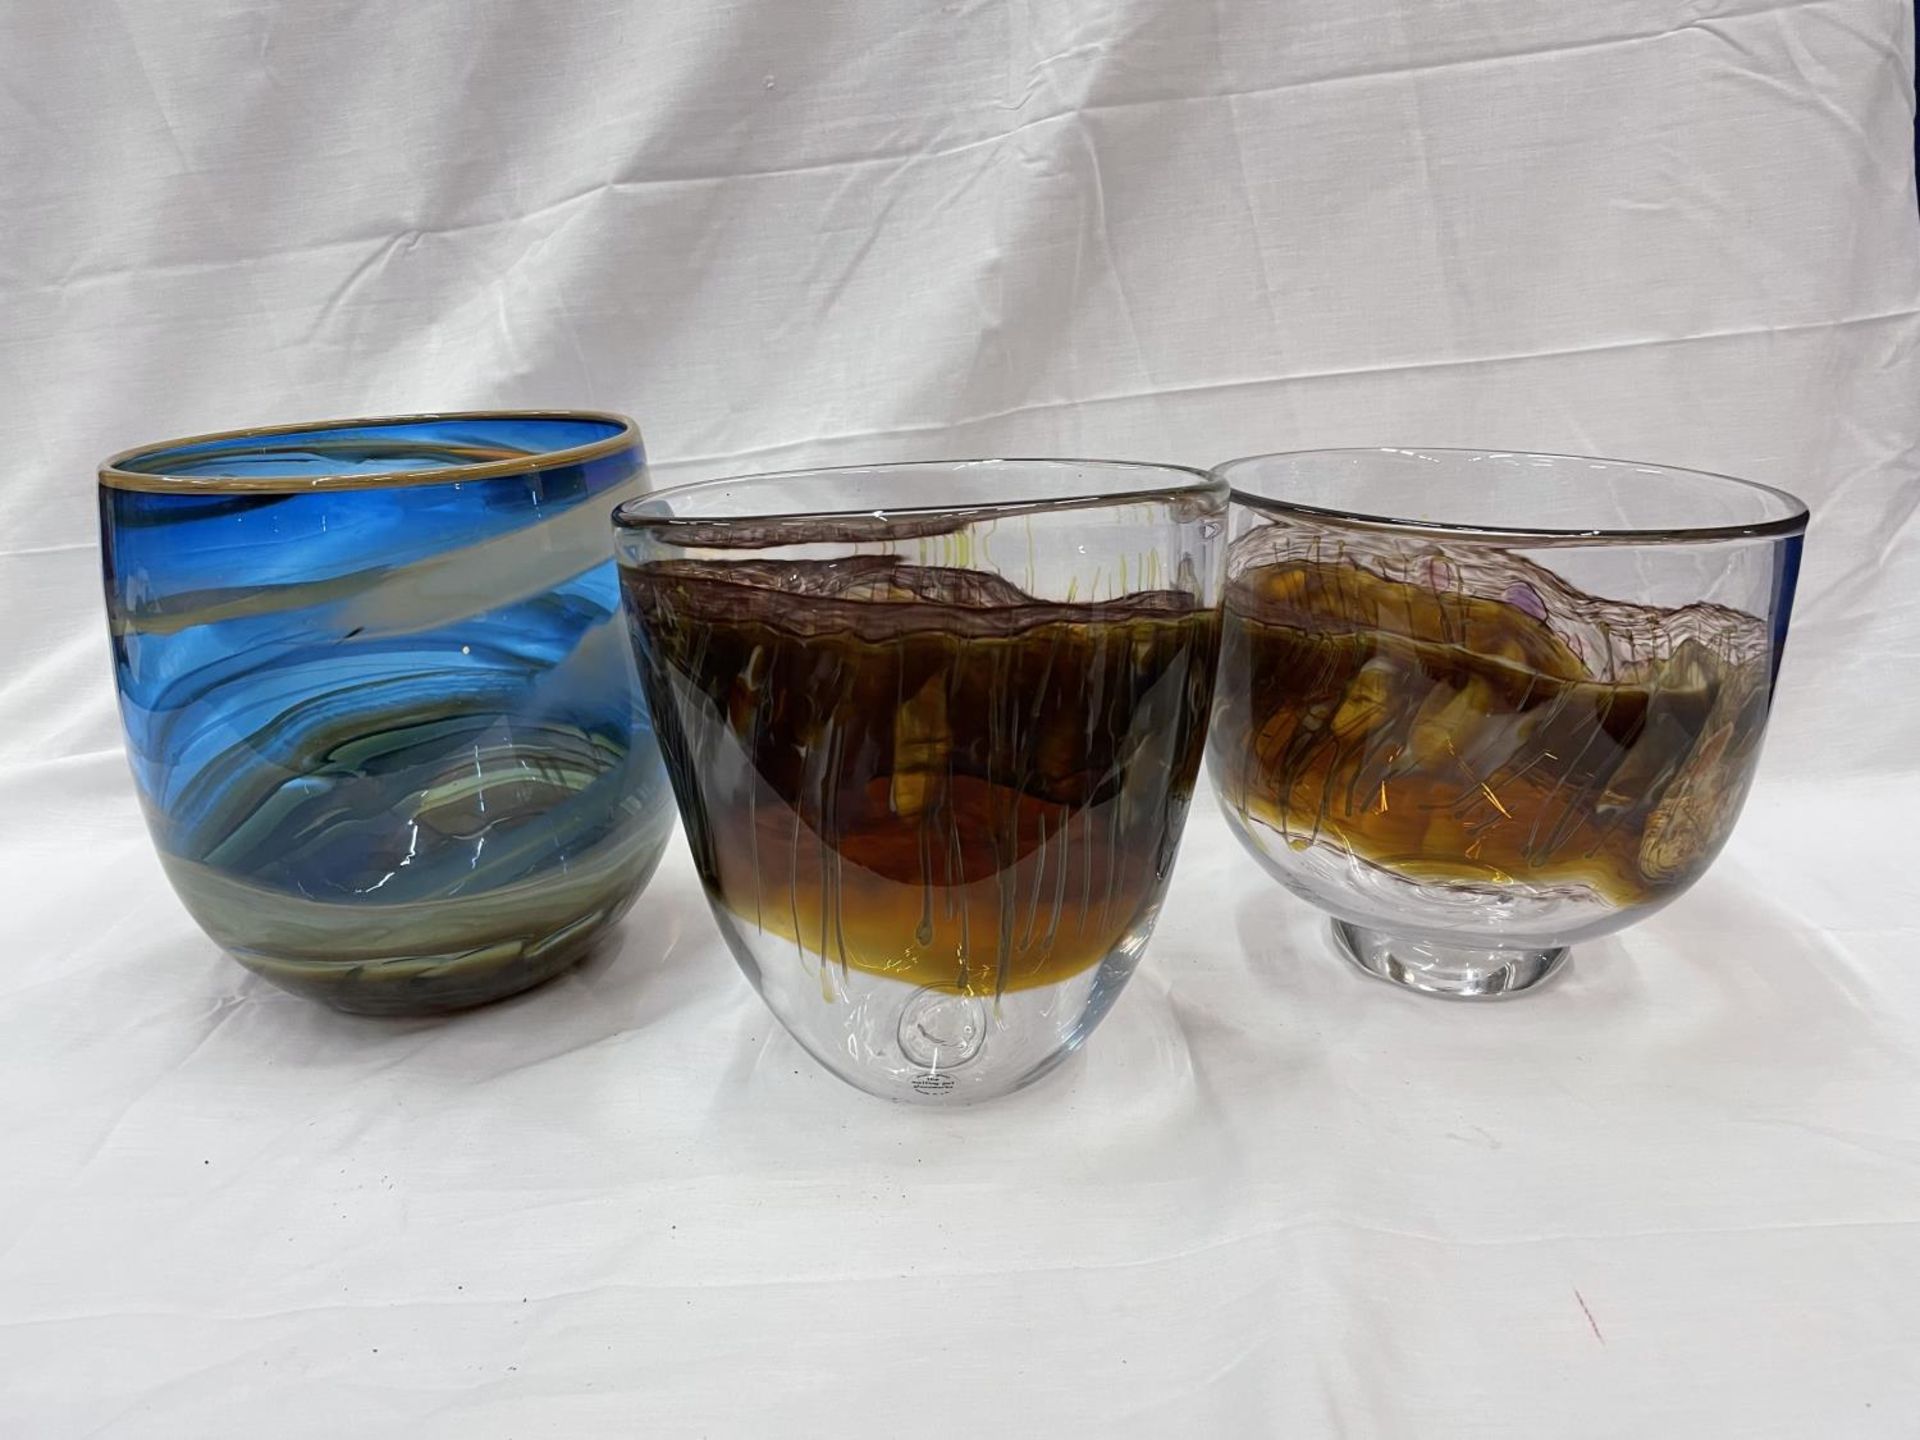 THREE LARGE 'THE MELTING POT' STUDIO GLASSWARE UK VASES SIGNED ROBIN SMITH ALL APPROX 23CM TALL